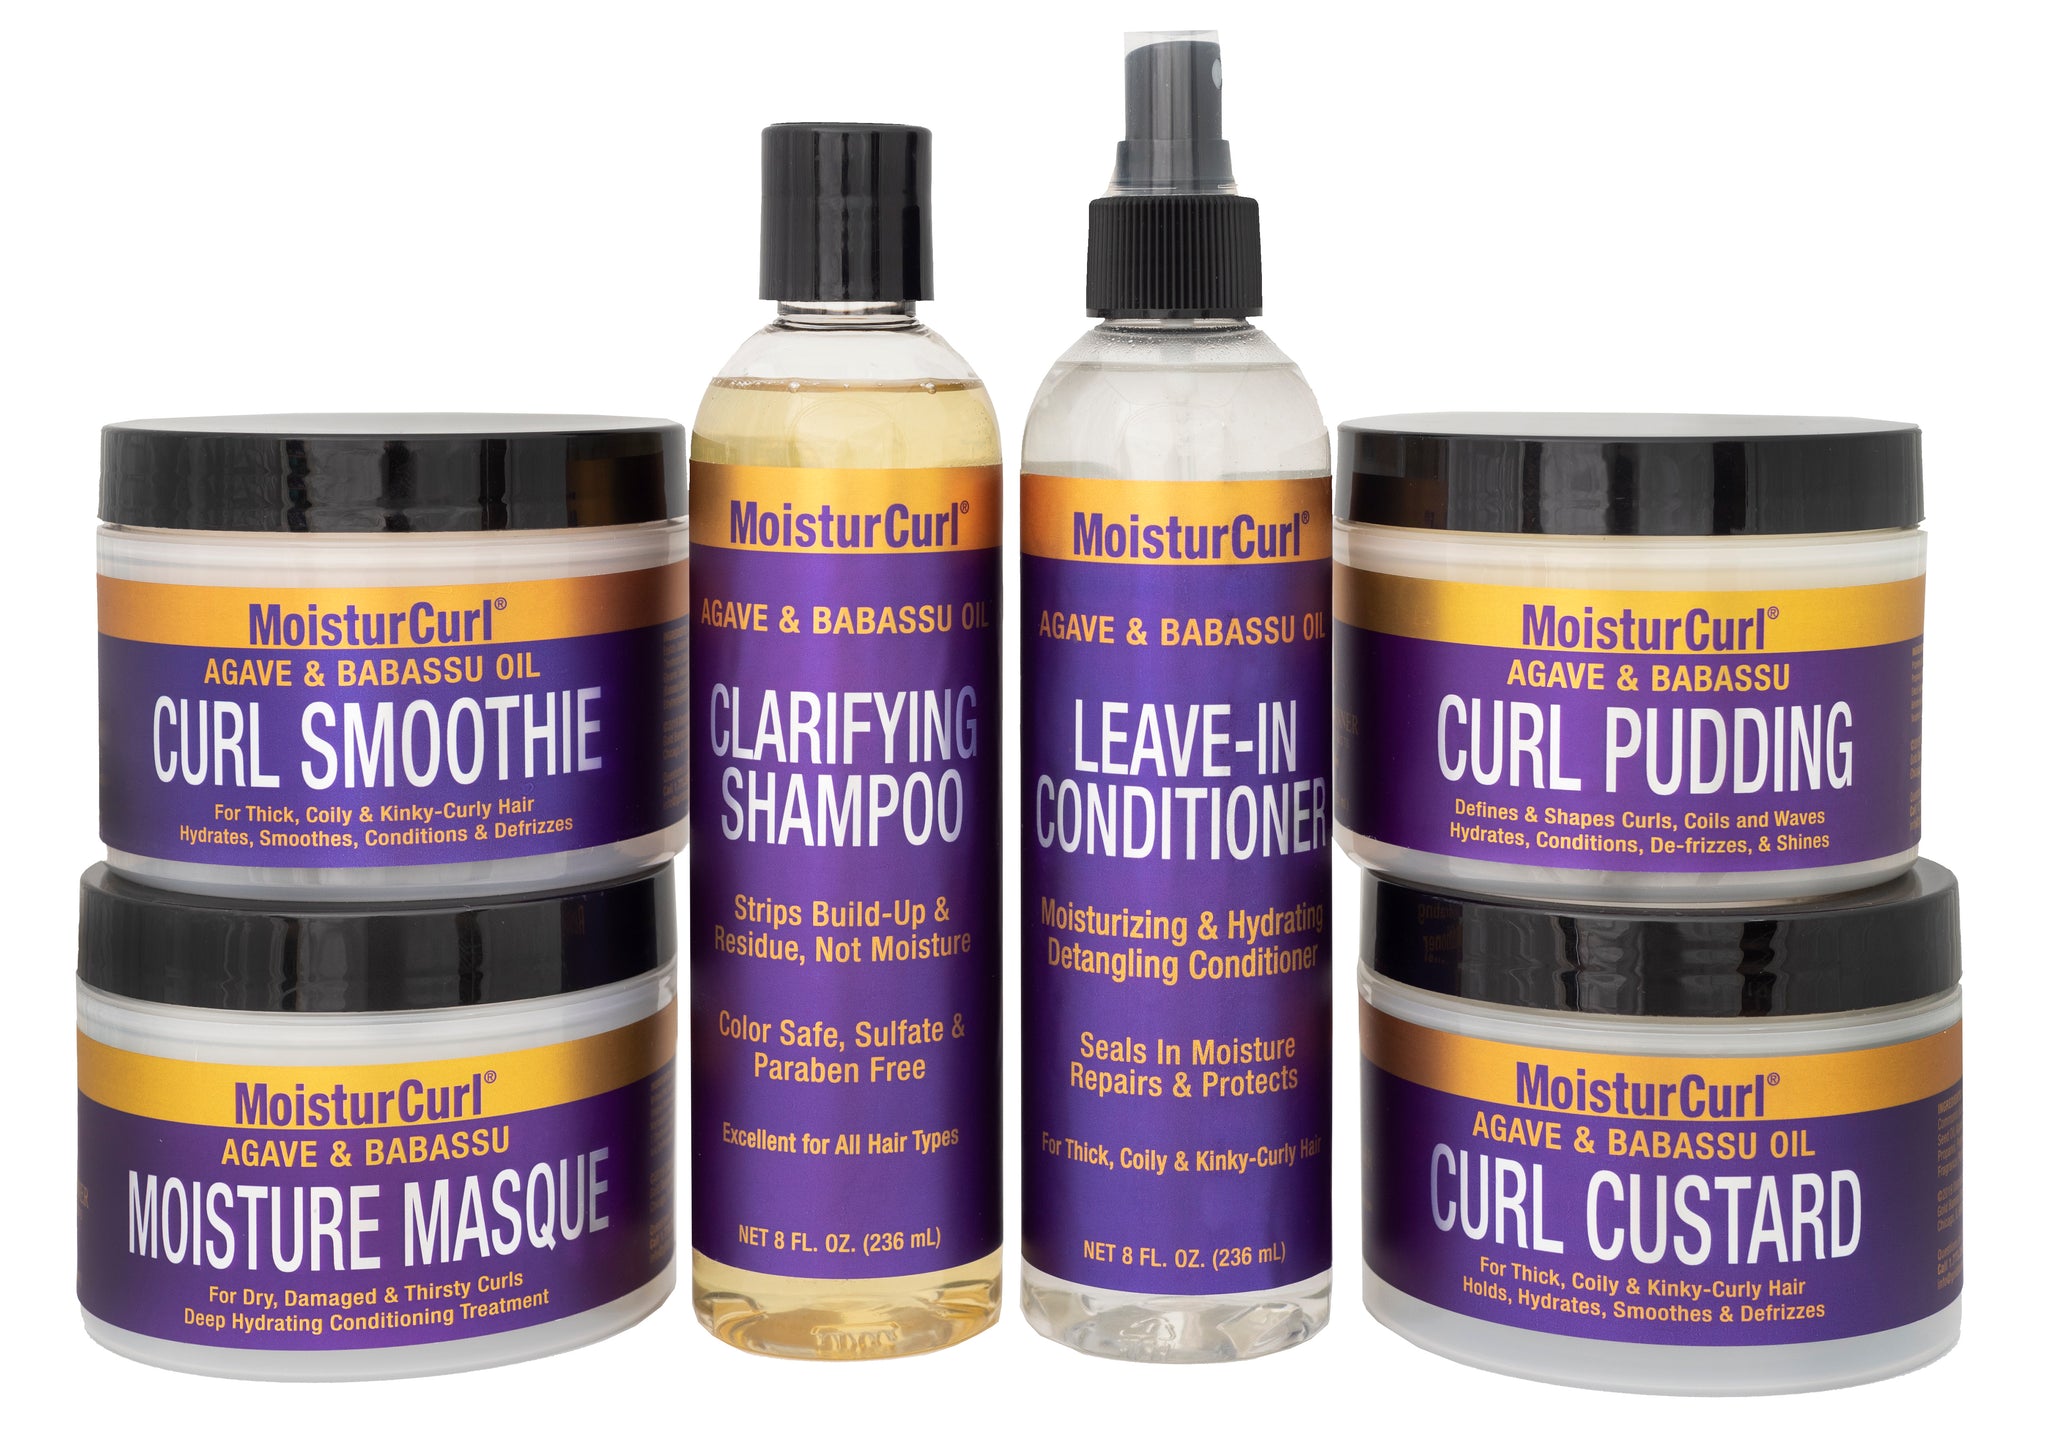 MoisturCurl Leave-In Conditioner Adds Moisture, Hydrates, Strengthens, Detangles, Repairs & Protects, For All Hair Types, Made with Agave & Babassu Butters 8oz.